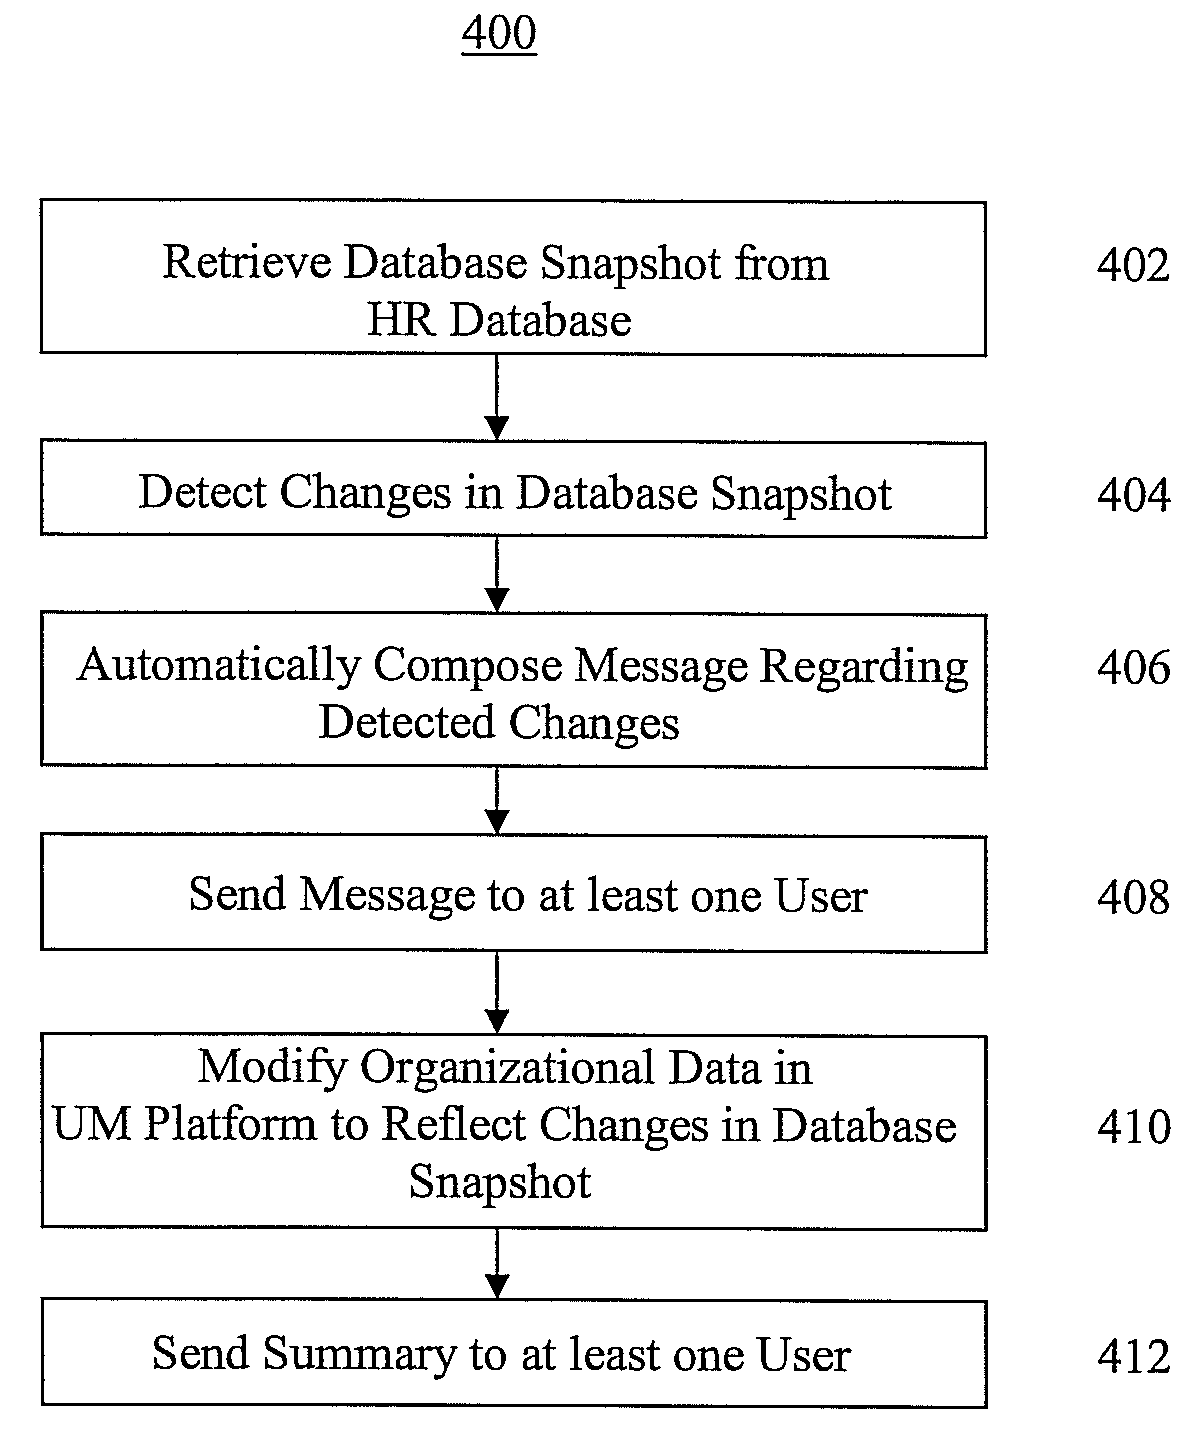 Method and System for Managing Changes in Organizational Data in Unified Messaging Systems